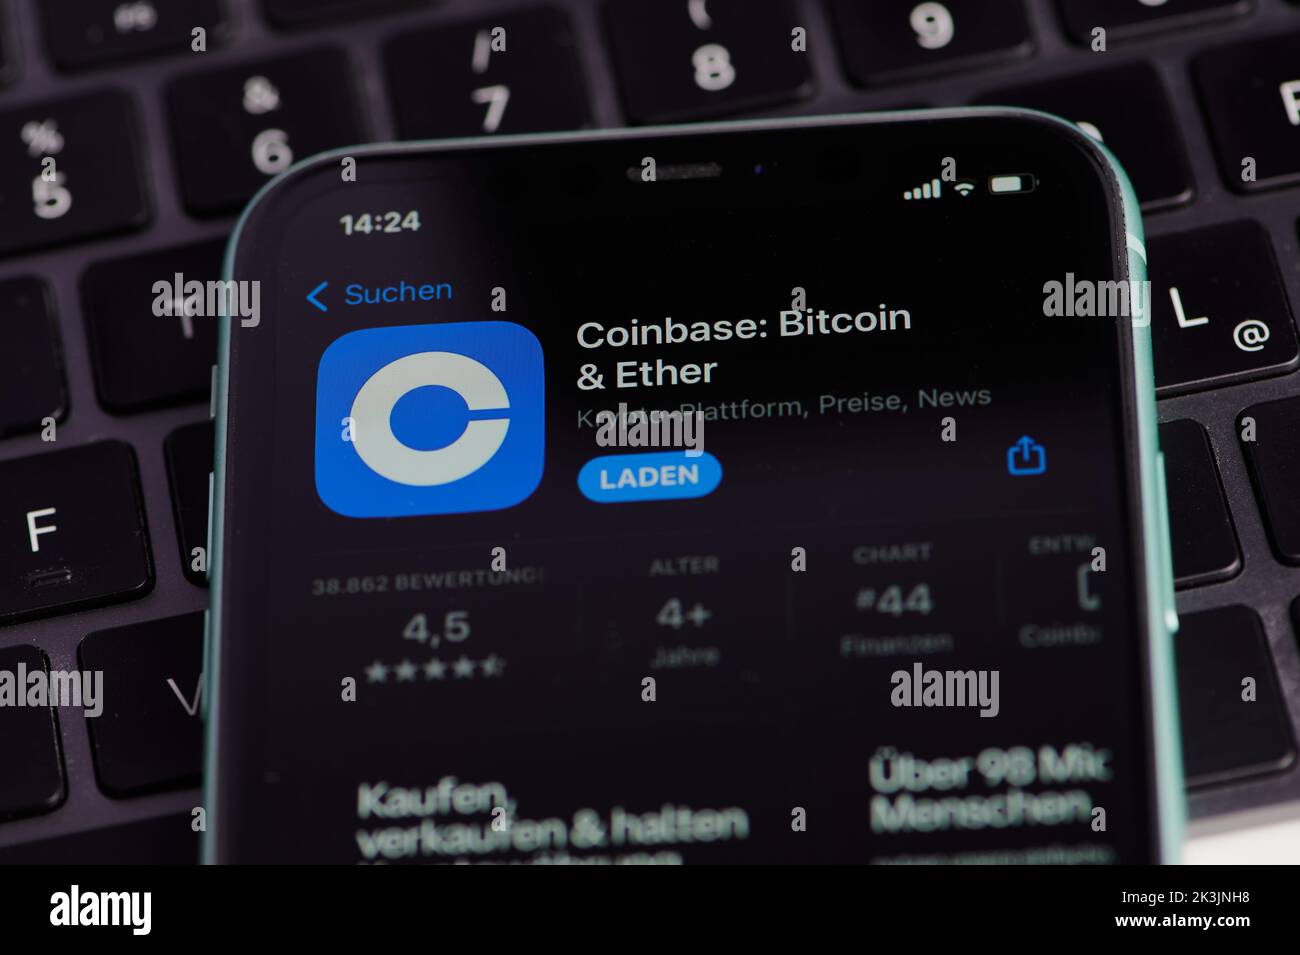 Mainz, Germany - September 25, 2022: Symbol Of Coinbase App On A Smartphone Screen In Germany. Stock Photo